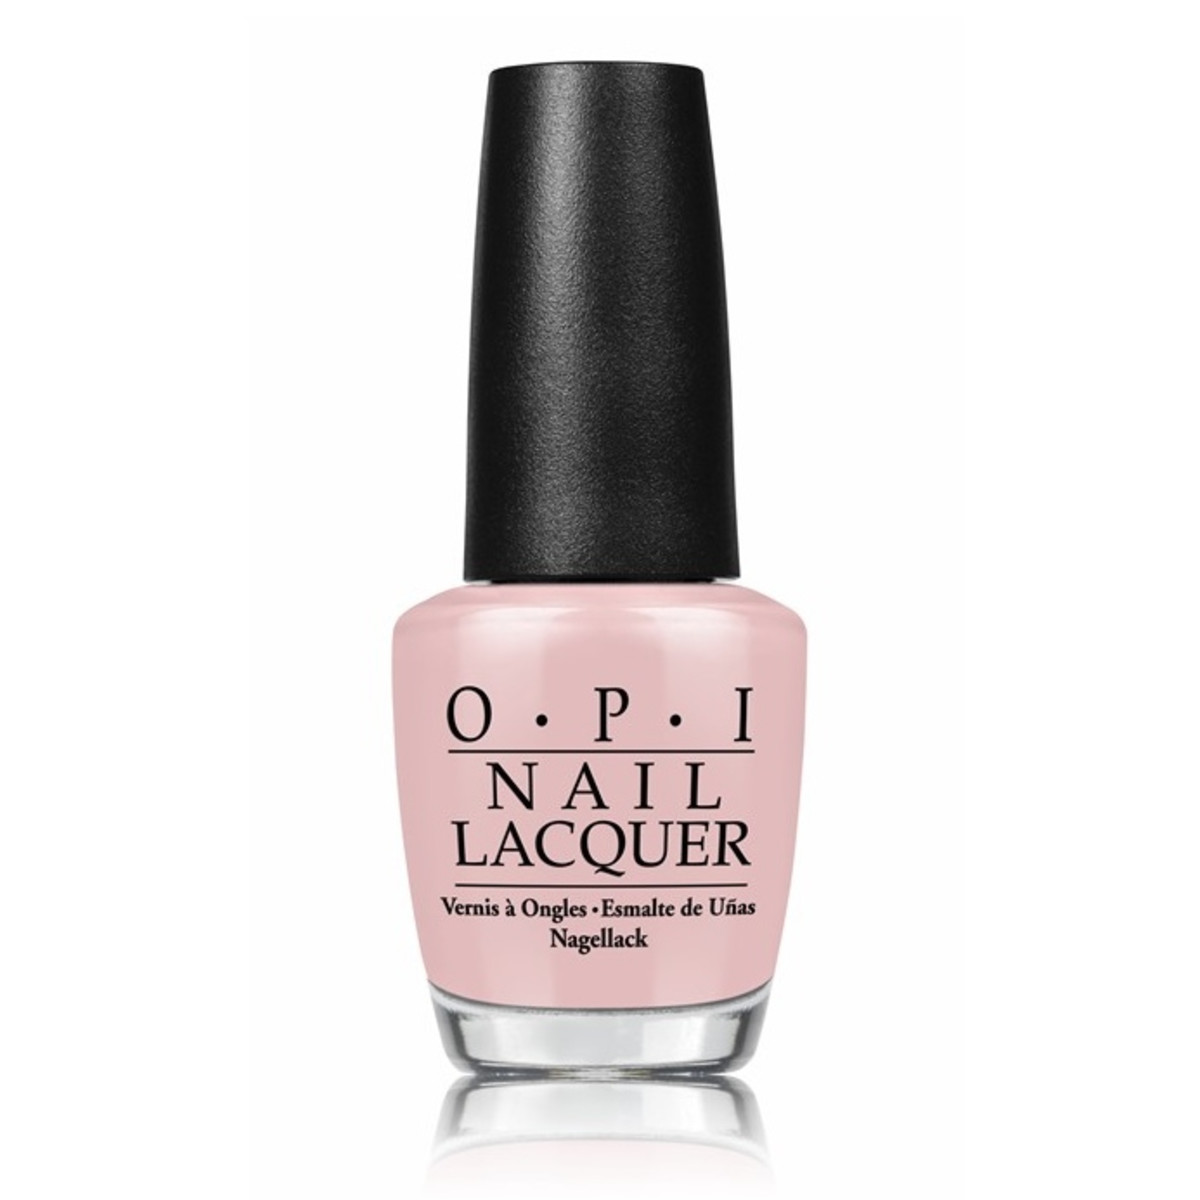 OPI Soft Shades 2015 Put it in Neutral